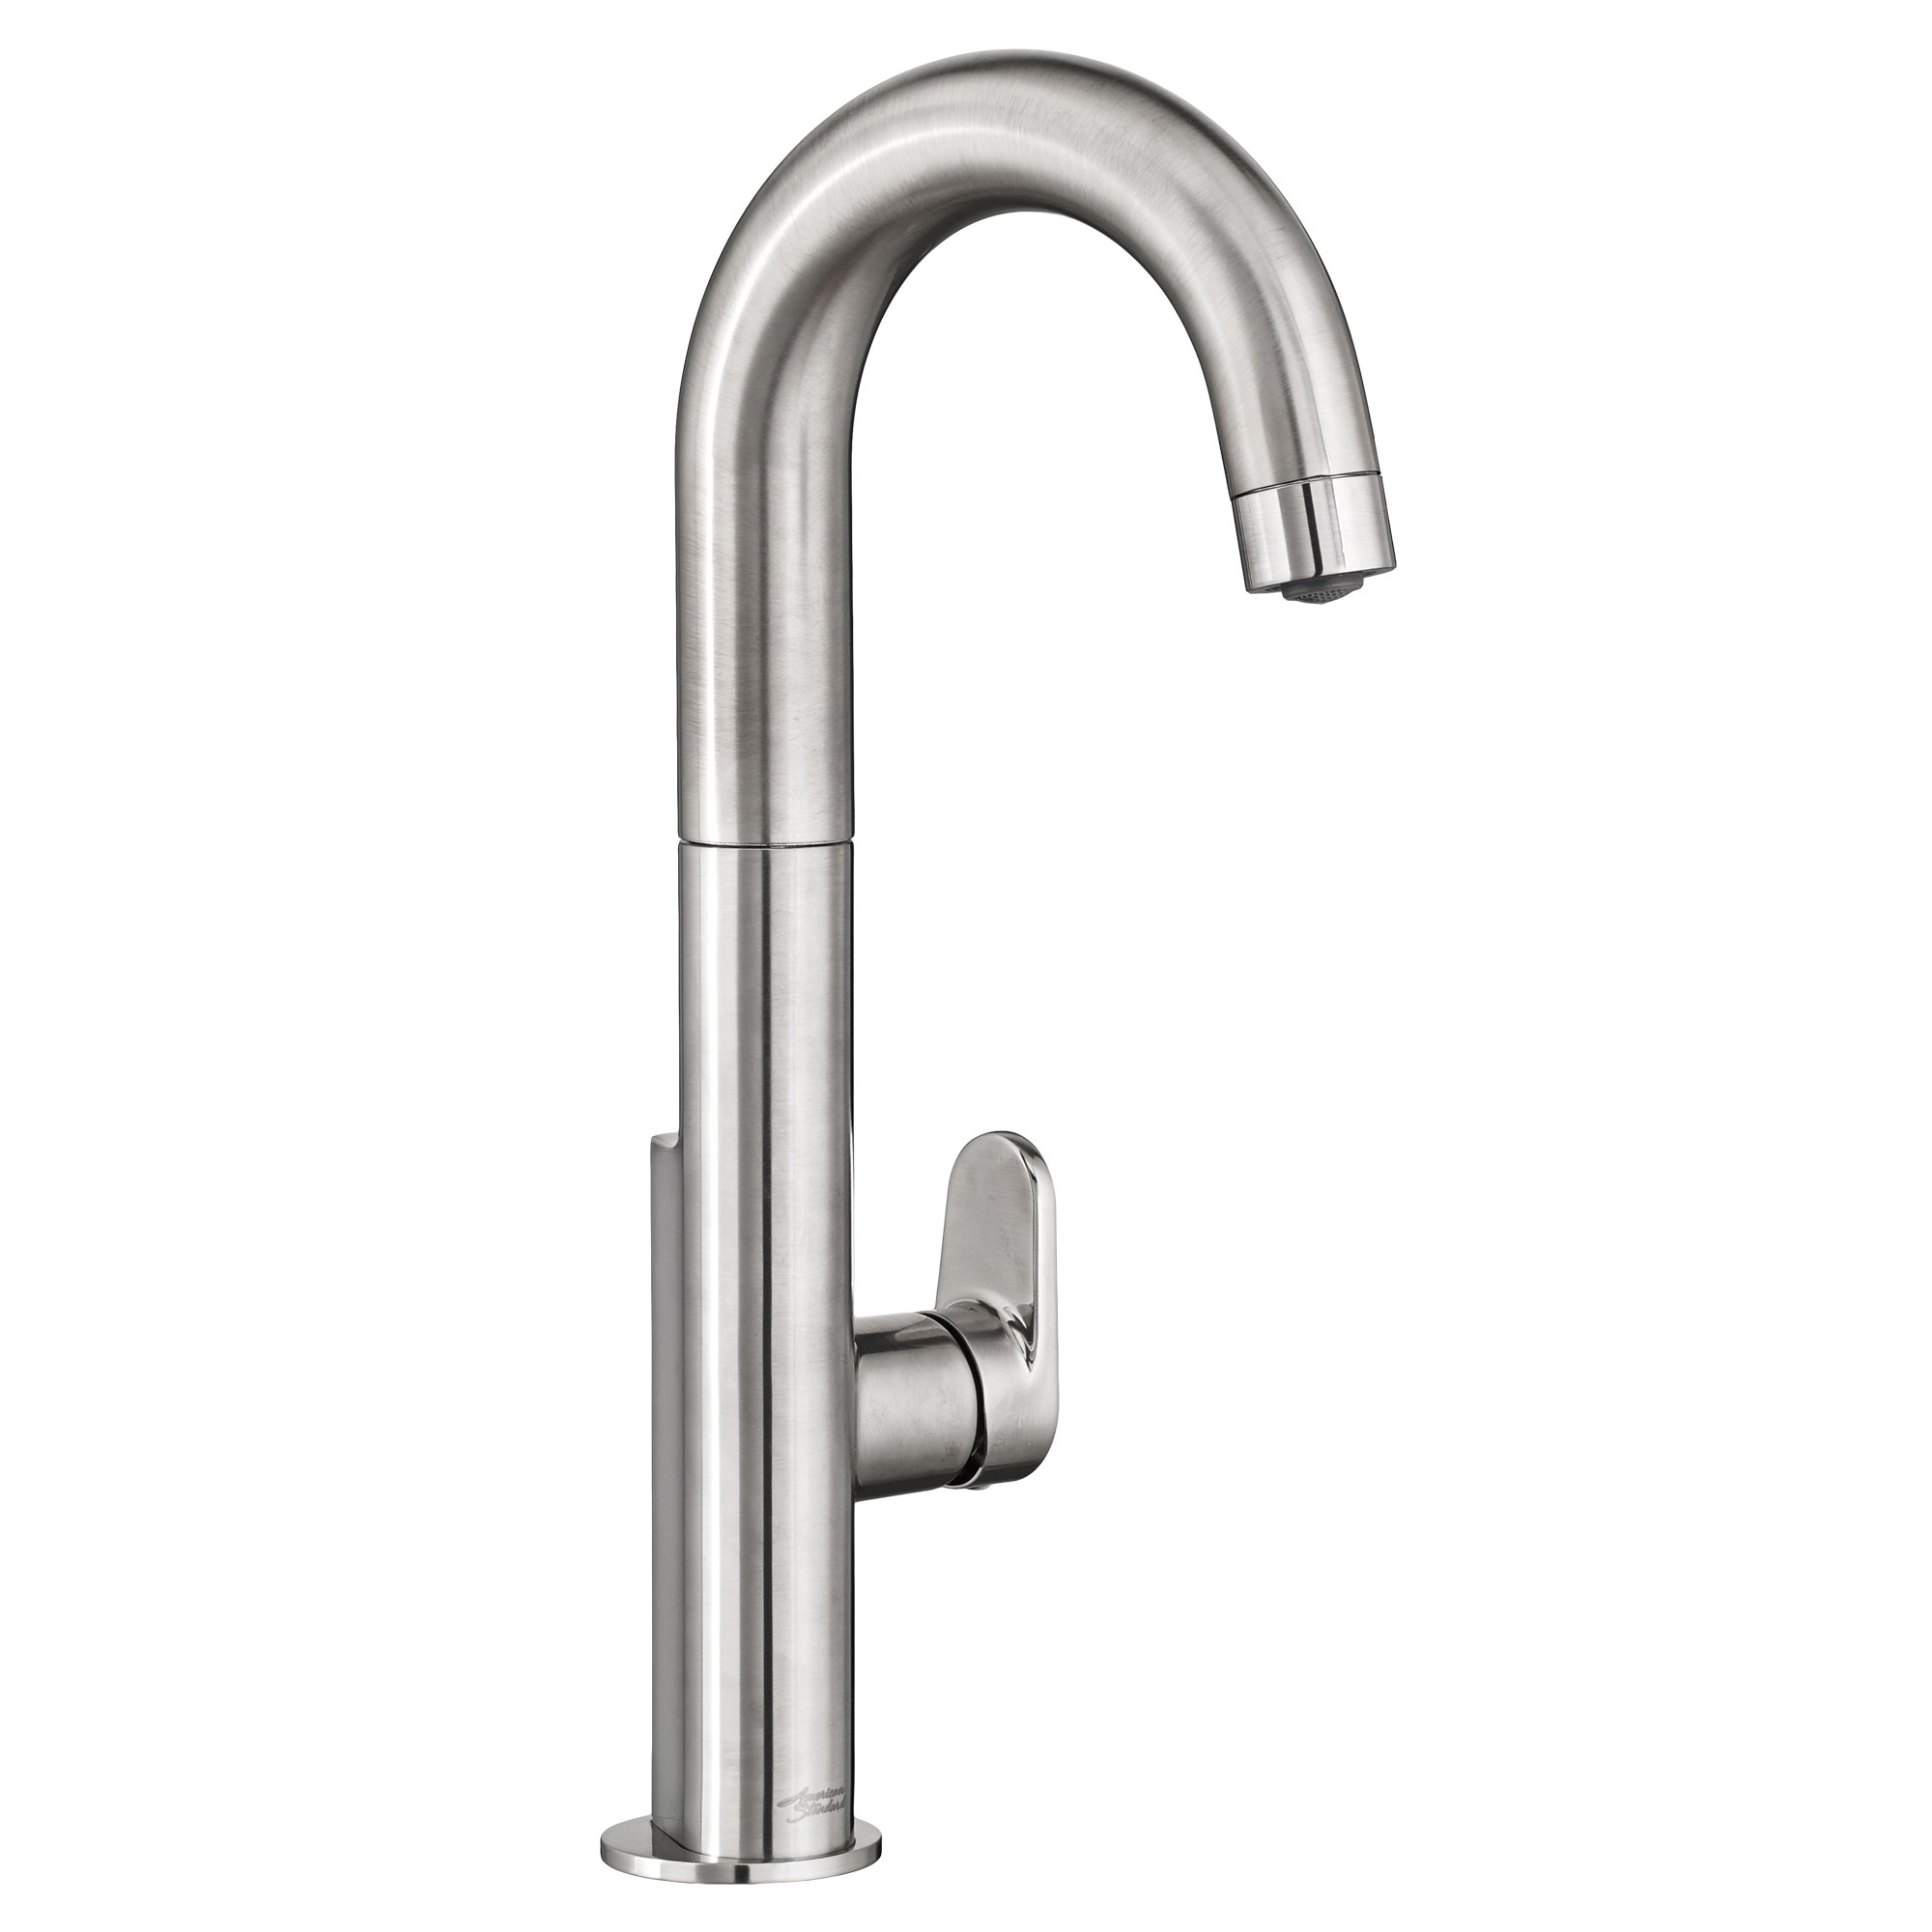 Beale Single Handle Pull-Down Spray Bar Faucet in Stainless Steel